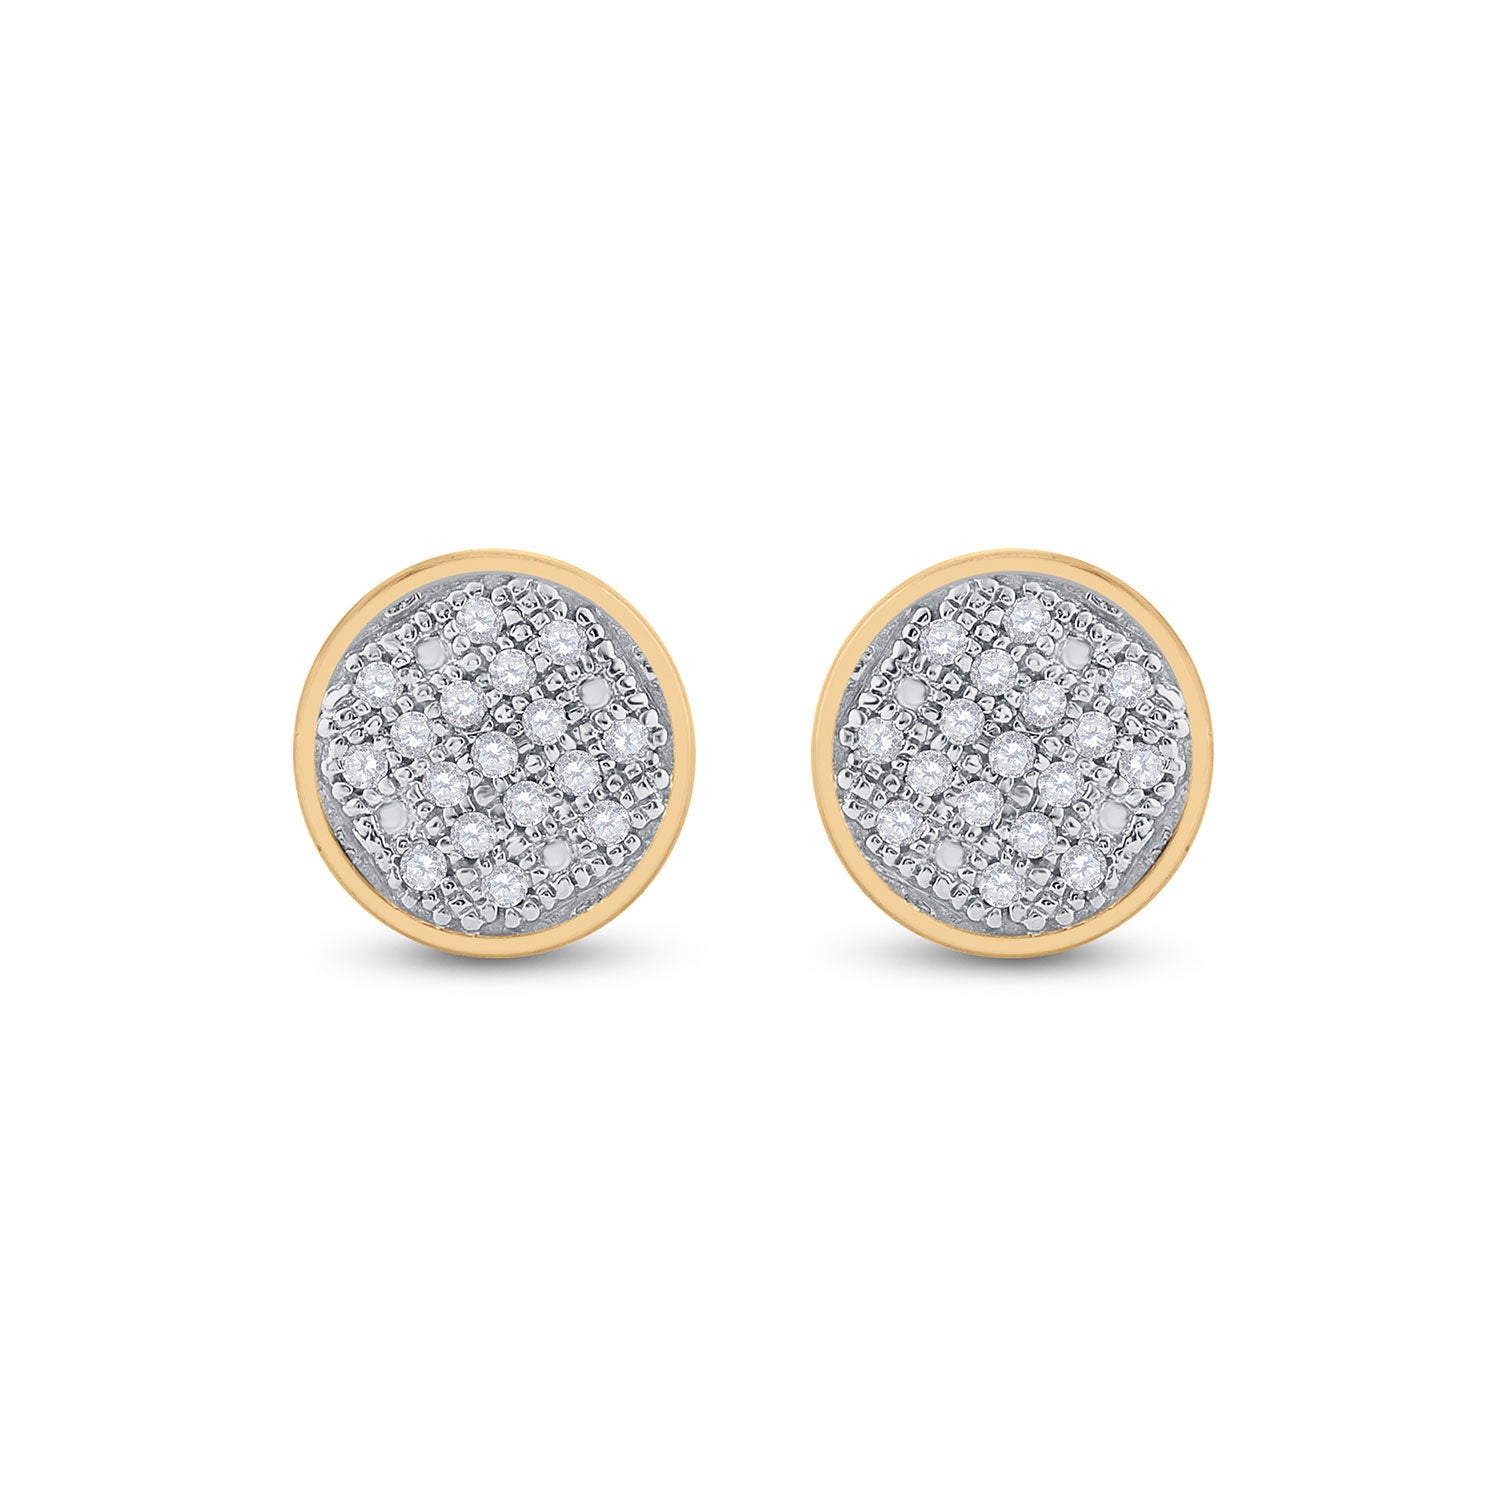 10kt Yellow Gold Womens Round Diamond Circle Cluster Earrings 1/10 Cttw